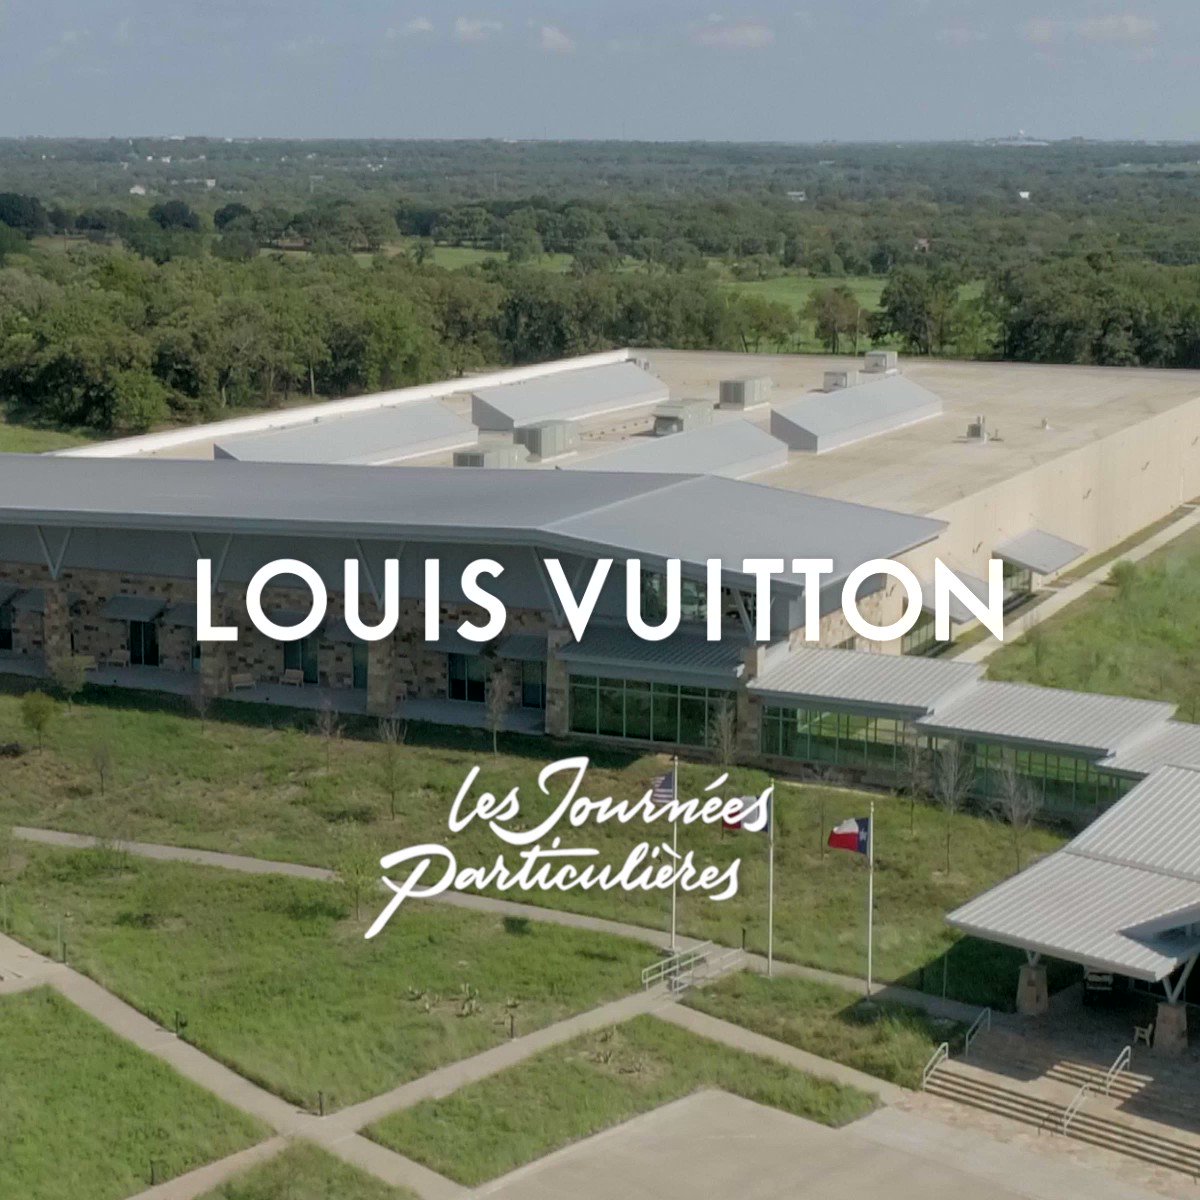 Louis Vuitton on X: Les Journées Particulières at Rochambeau. Located on a  ranch near Dallas, Texas, this ultra-modern workshop combines # LouisVuitton's traditional craftsmanship with technical innovation. Plan  your visit from October 14th-16